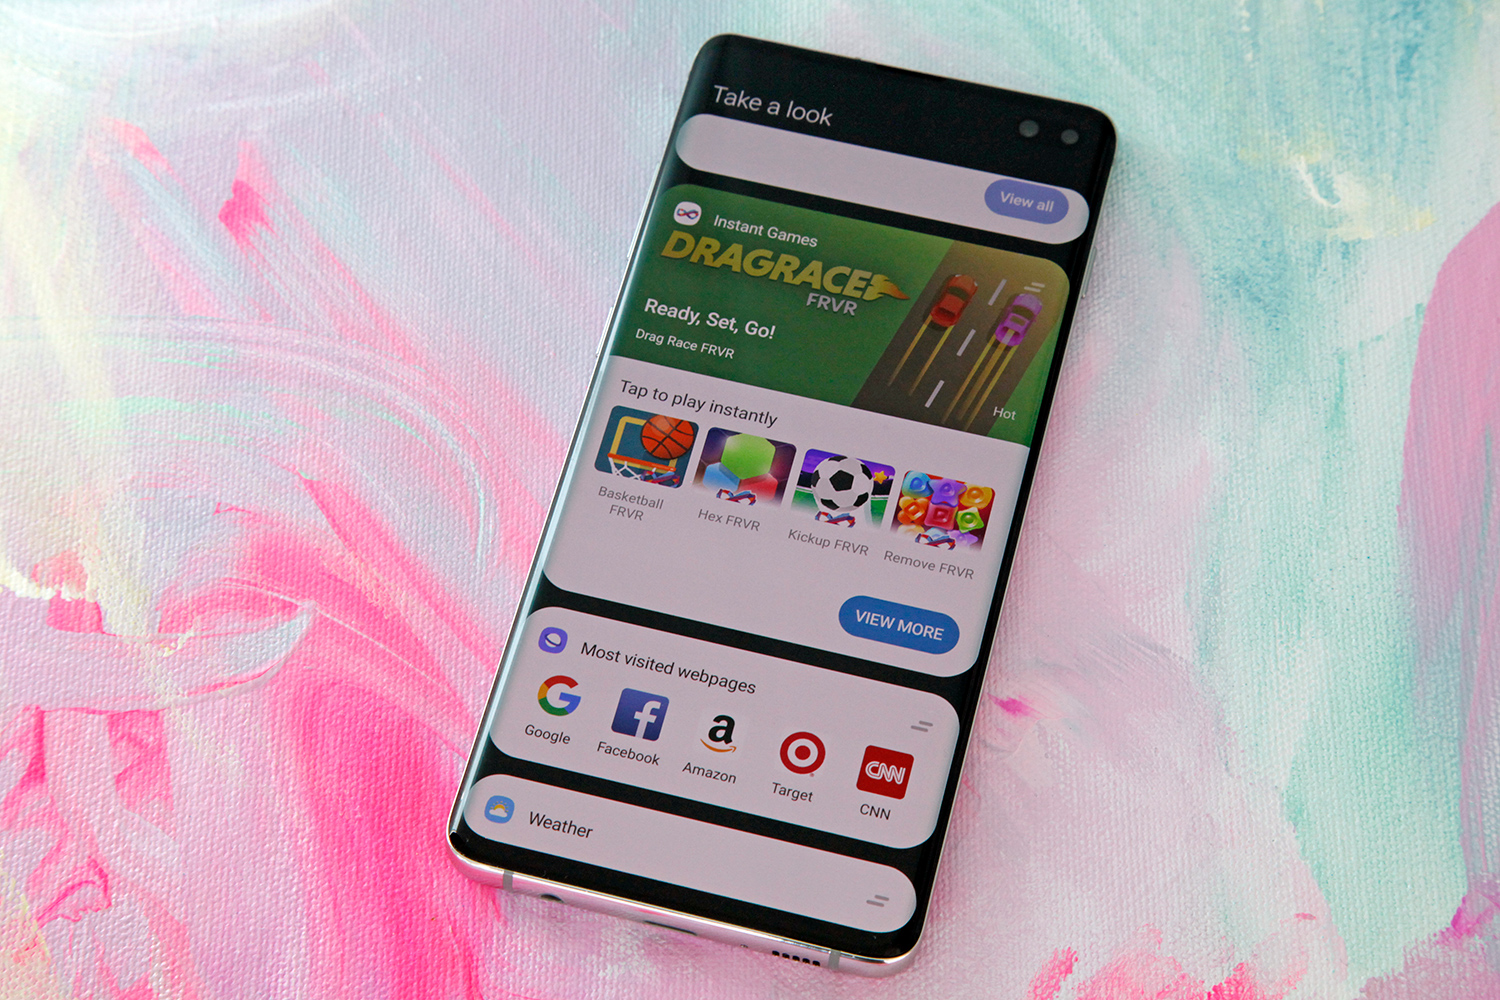 The Galaxy S10 Beat The Iphone Xs Max In A Real Life Speed Test But There S A Big Twist Bgr